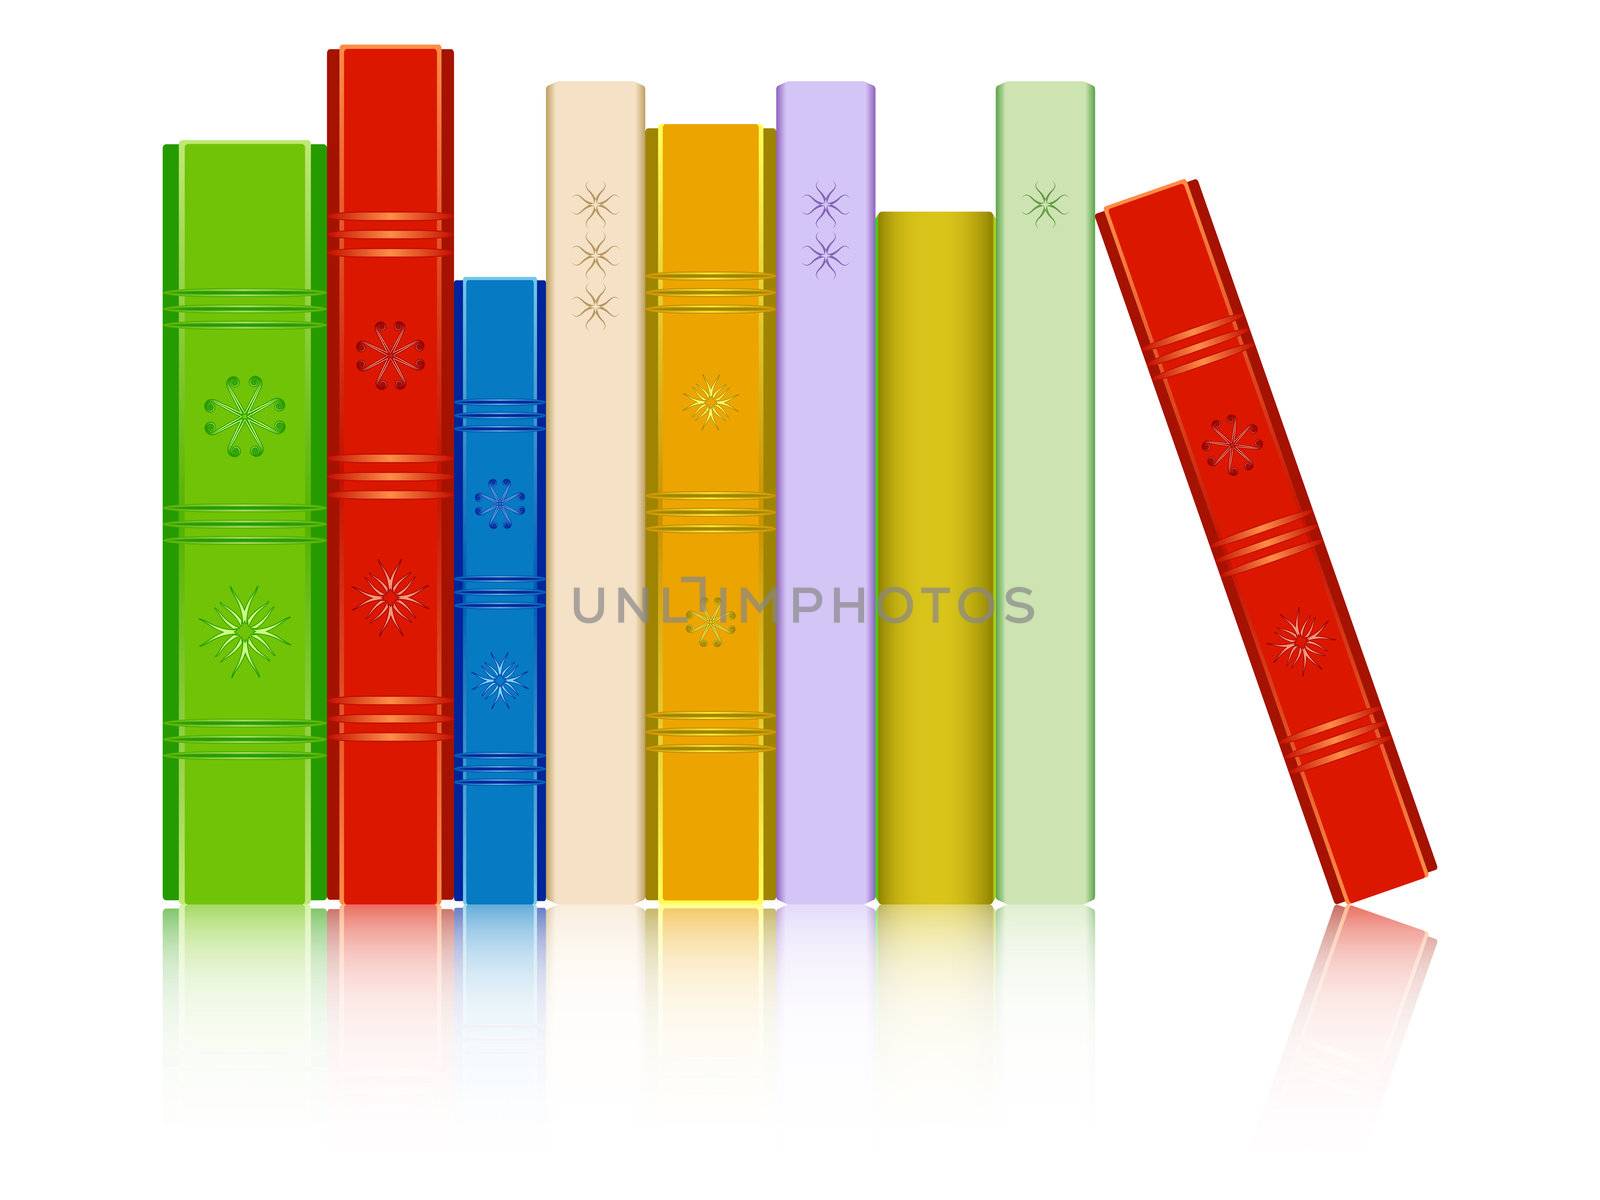 books in a row reflected against white background; abstract vector art illustration; image contains opacity mask